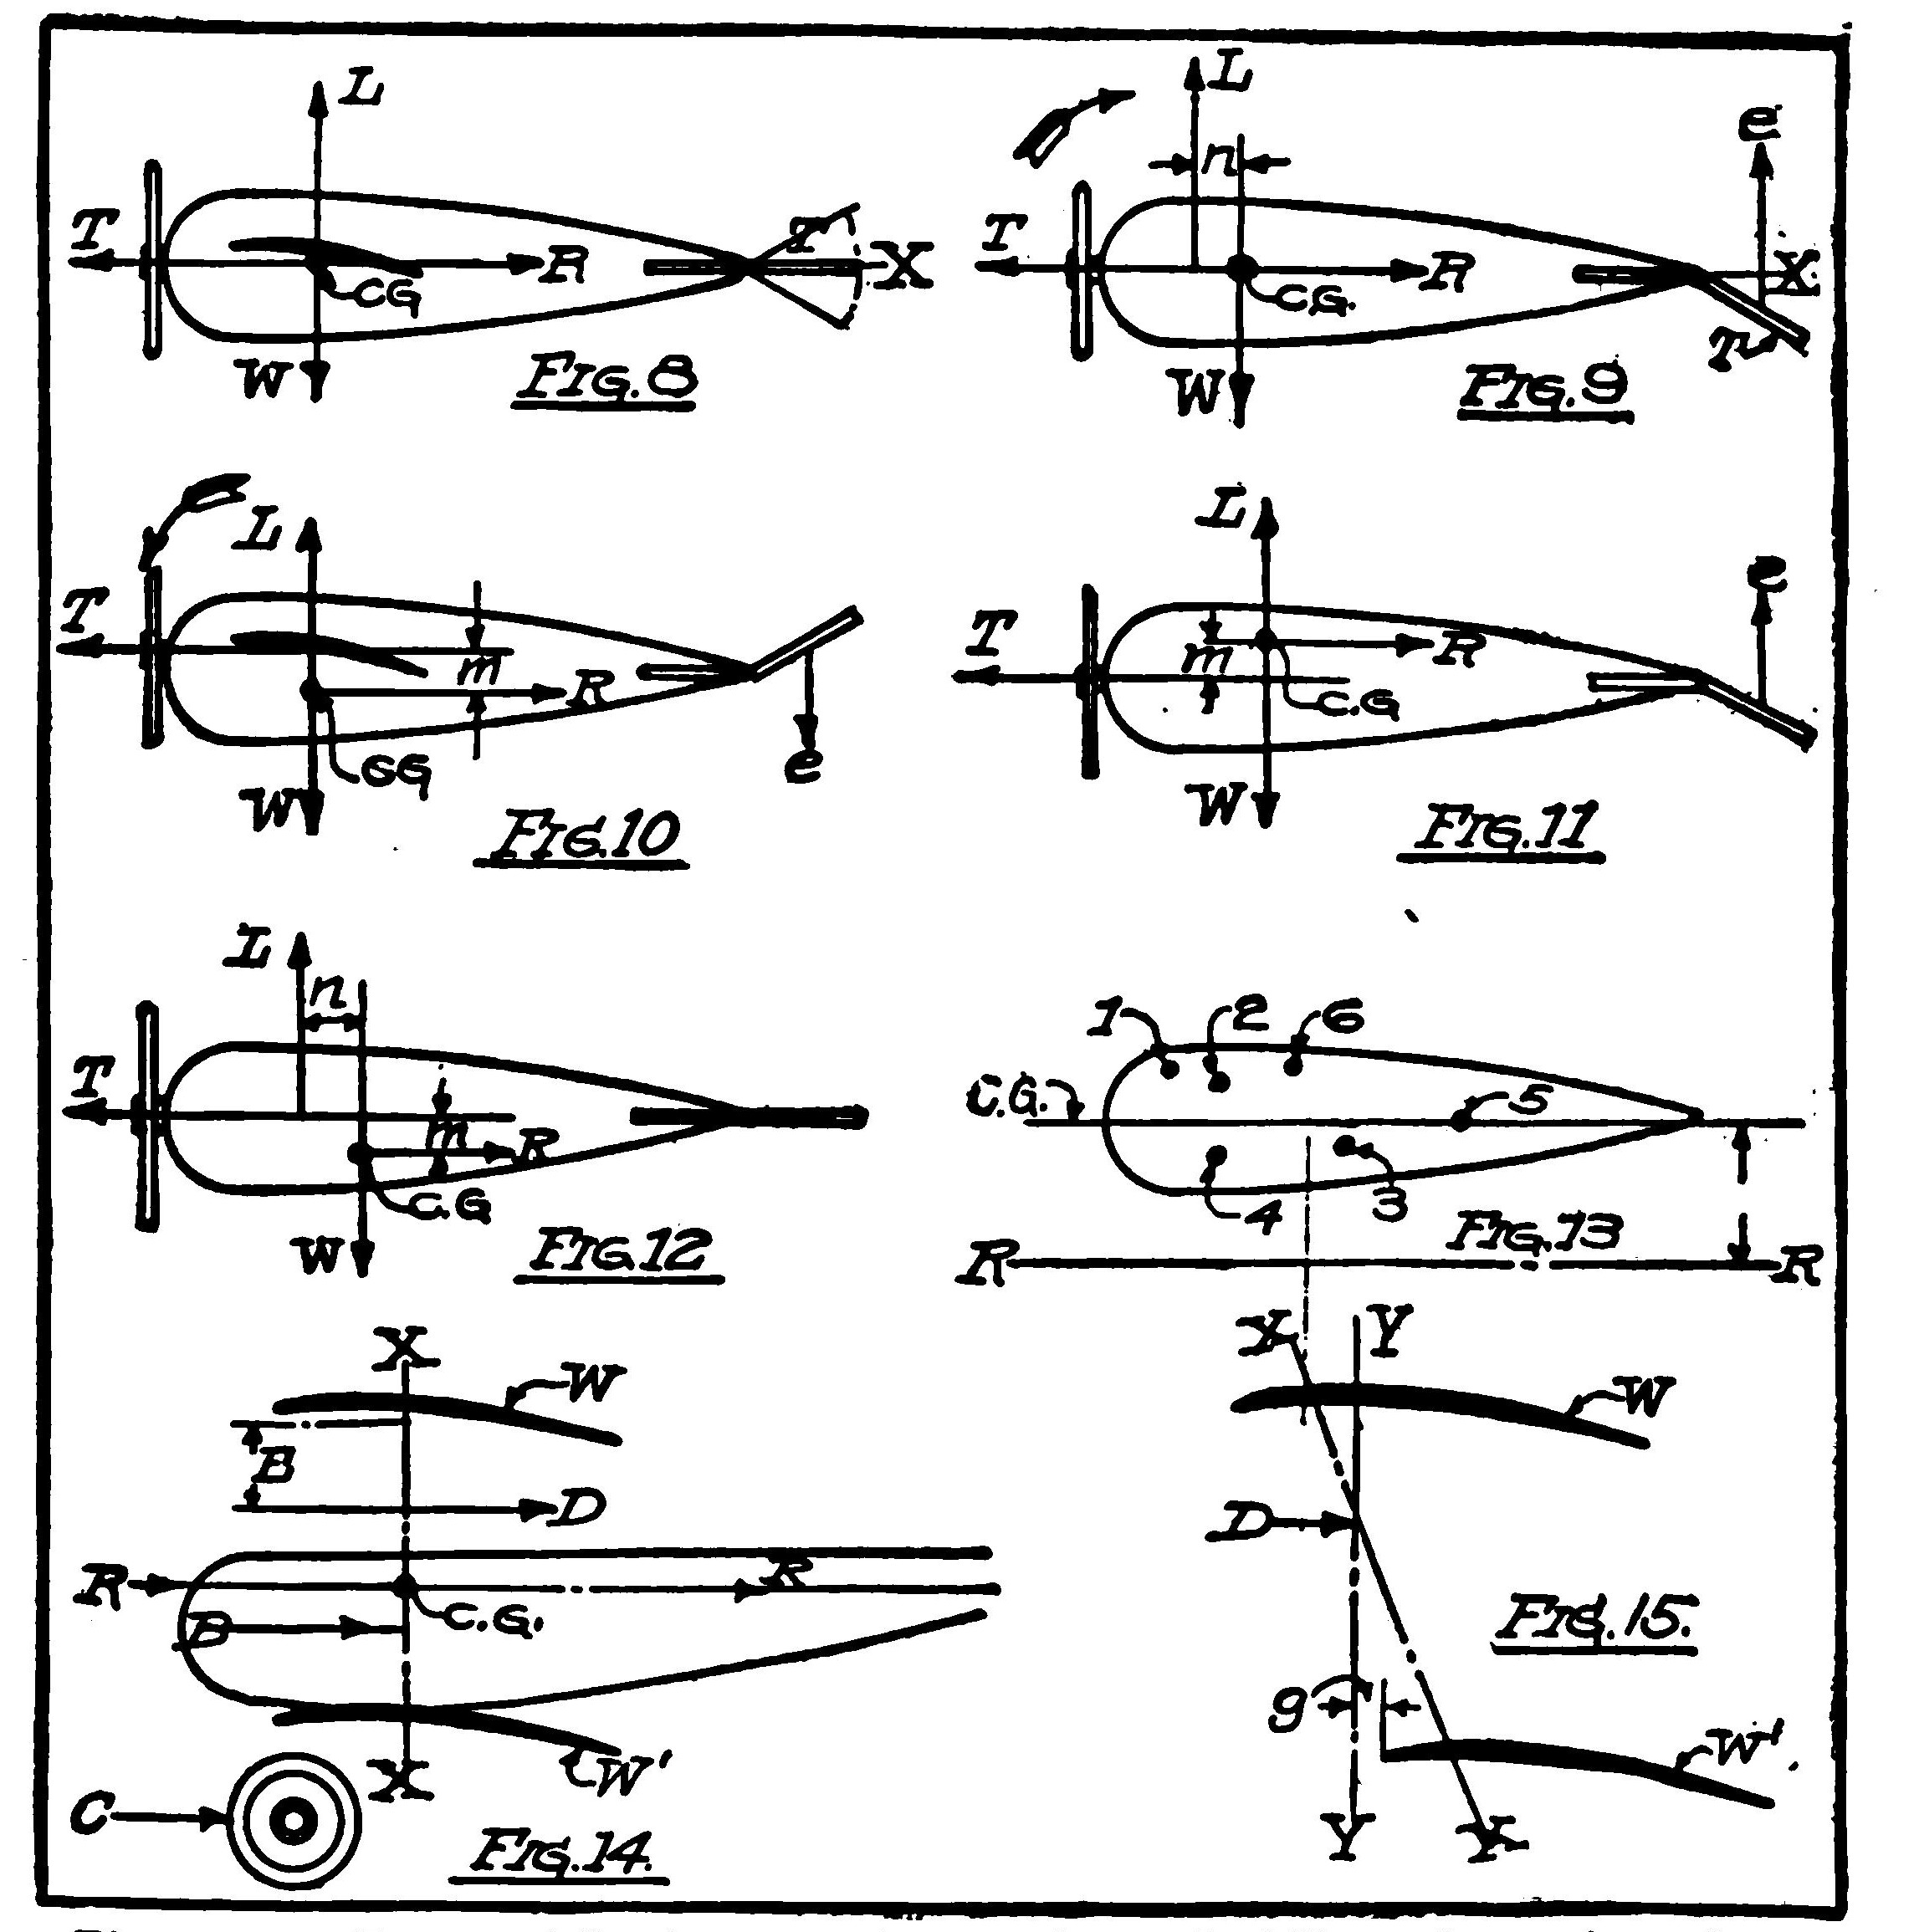 Figs. 8-15. Forces Affecting the Longitudinal Stability of an Aeroplane.